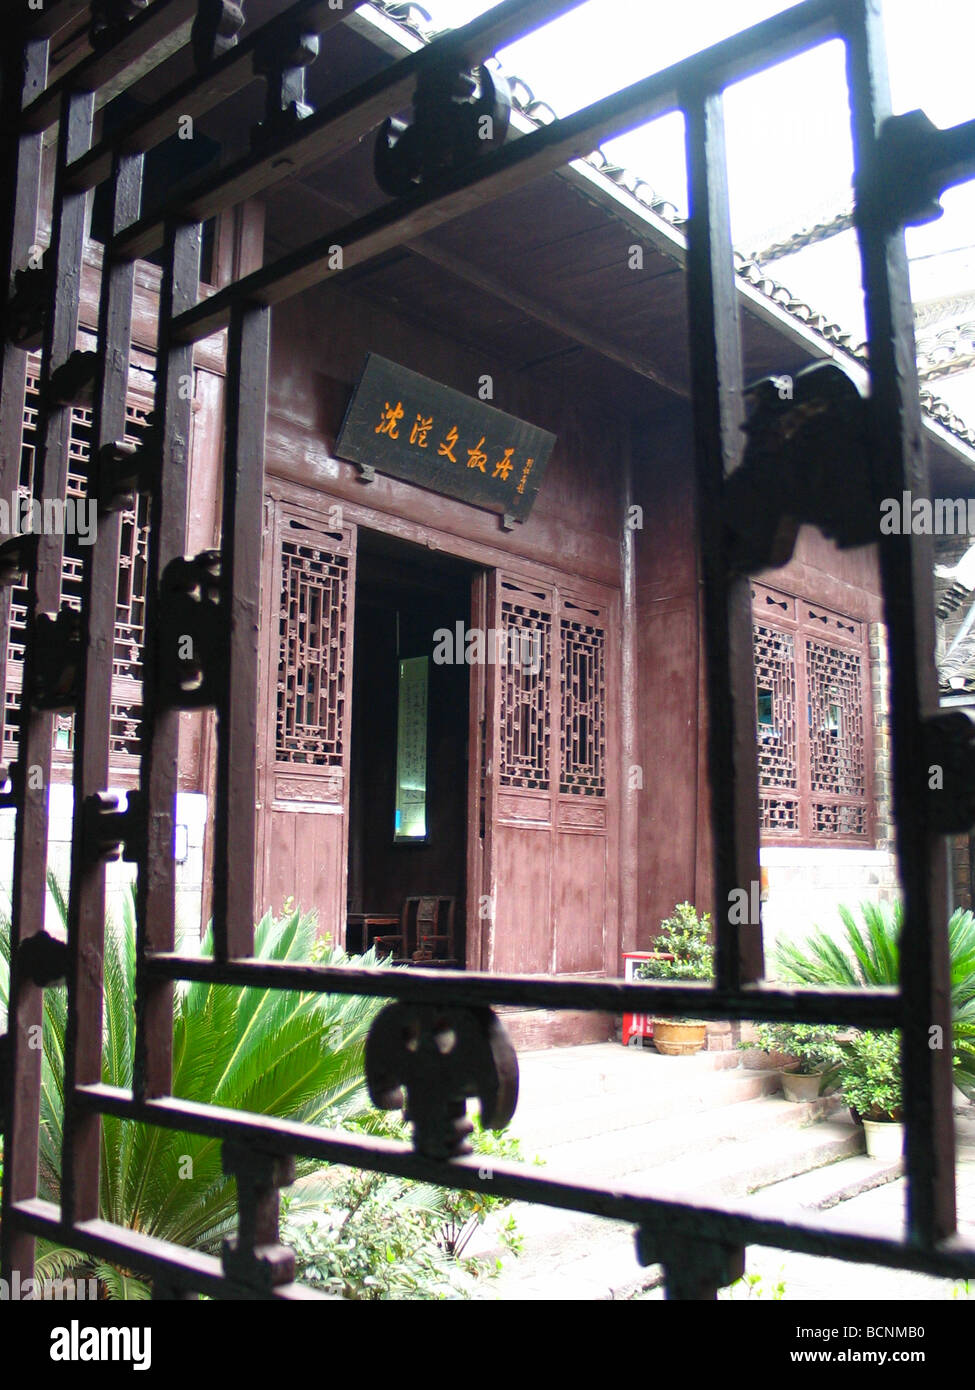 Residence of Shen Congwen, one of the greatest writers in China , Fennaghuang, Hunan Province, China Stock Photo